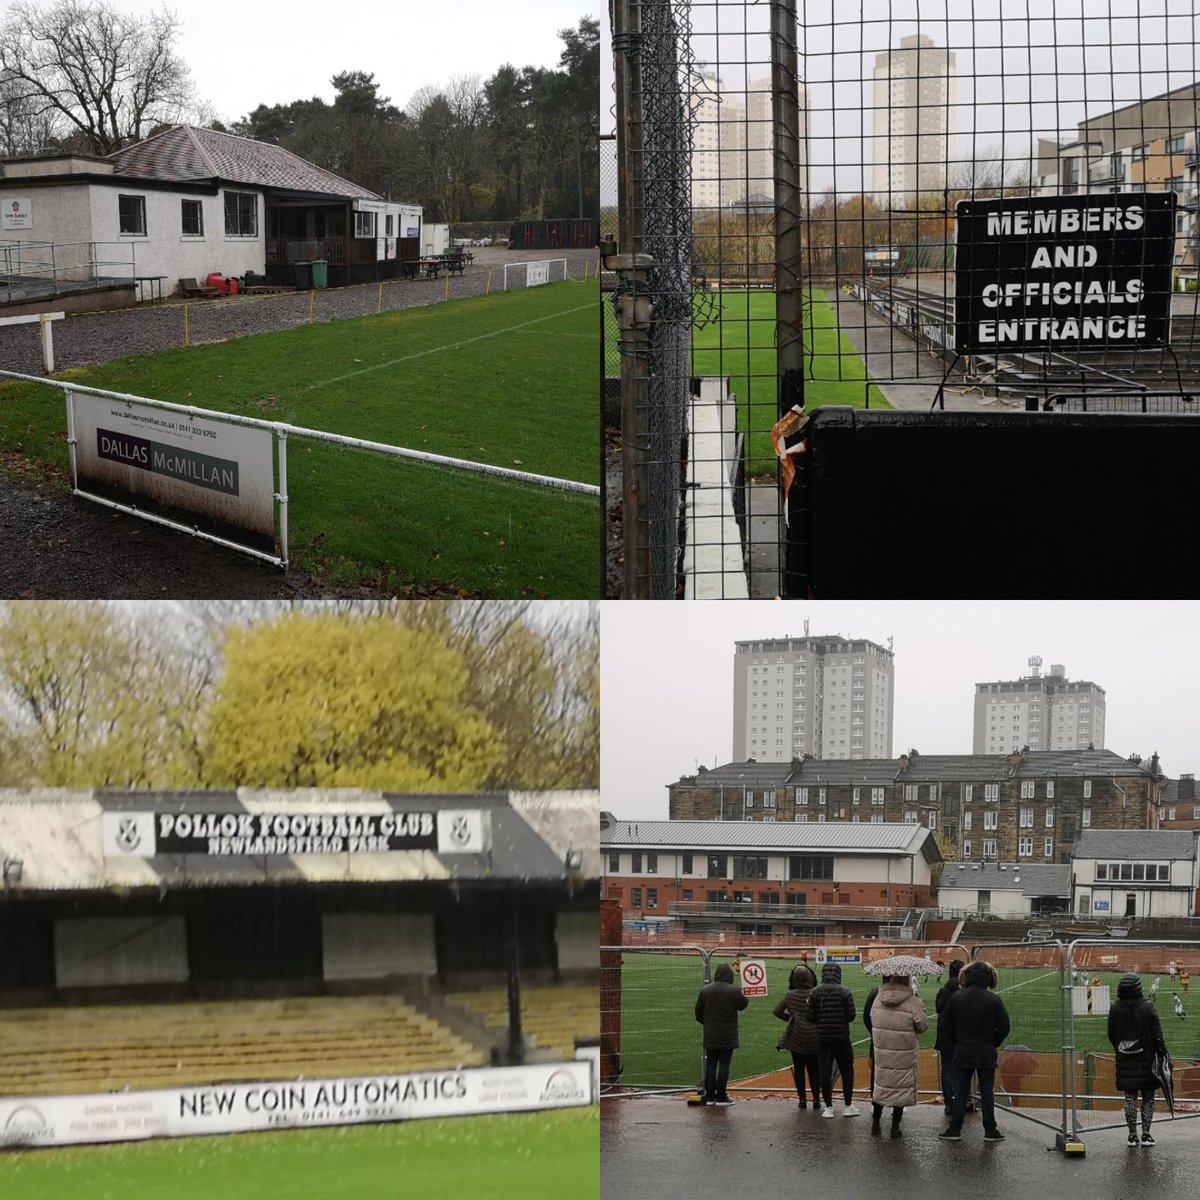 Pollok Estate has several pitches, I ran past Norwood, Home to Giffnock SC" on my way to Newlandsfield, home to Pollok FC. Then on to Lesser Hampden where Queens Park are based. 3/7